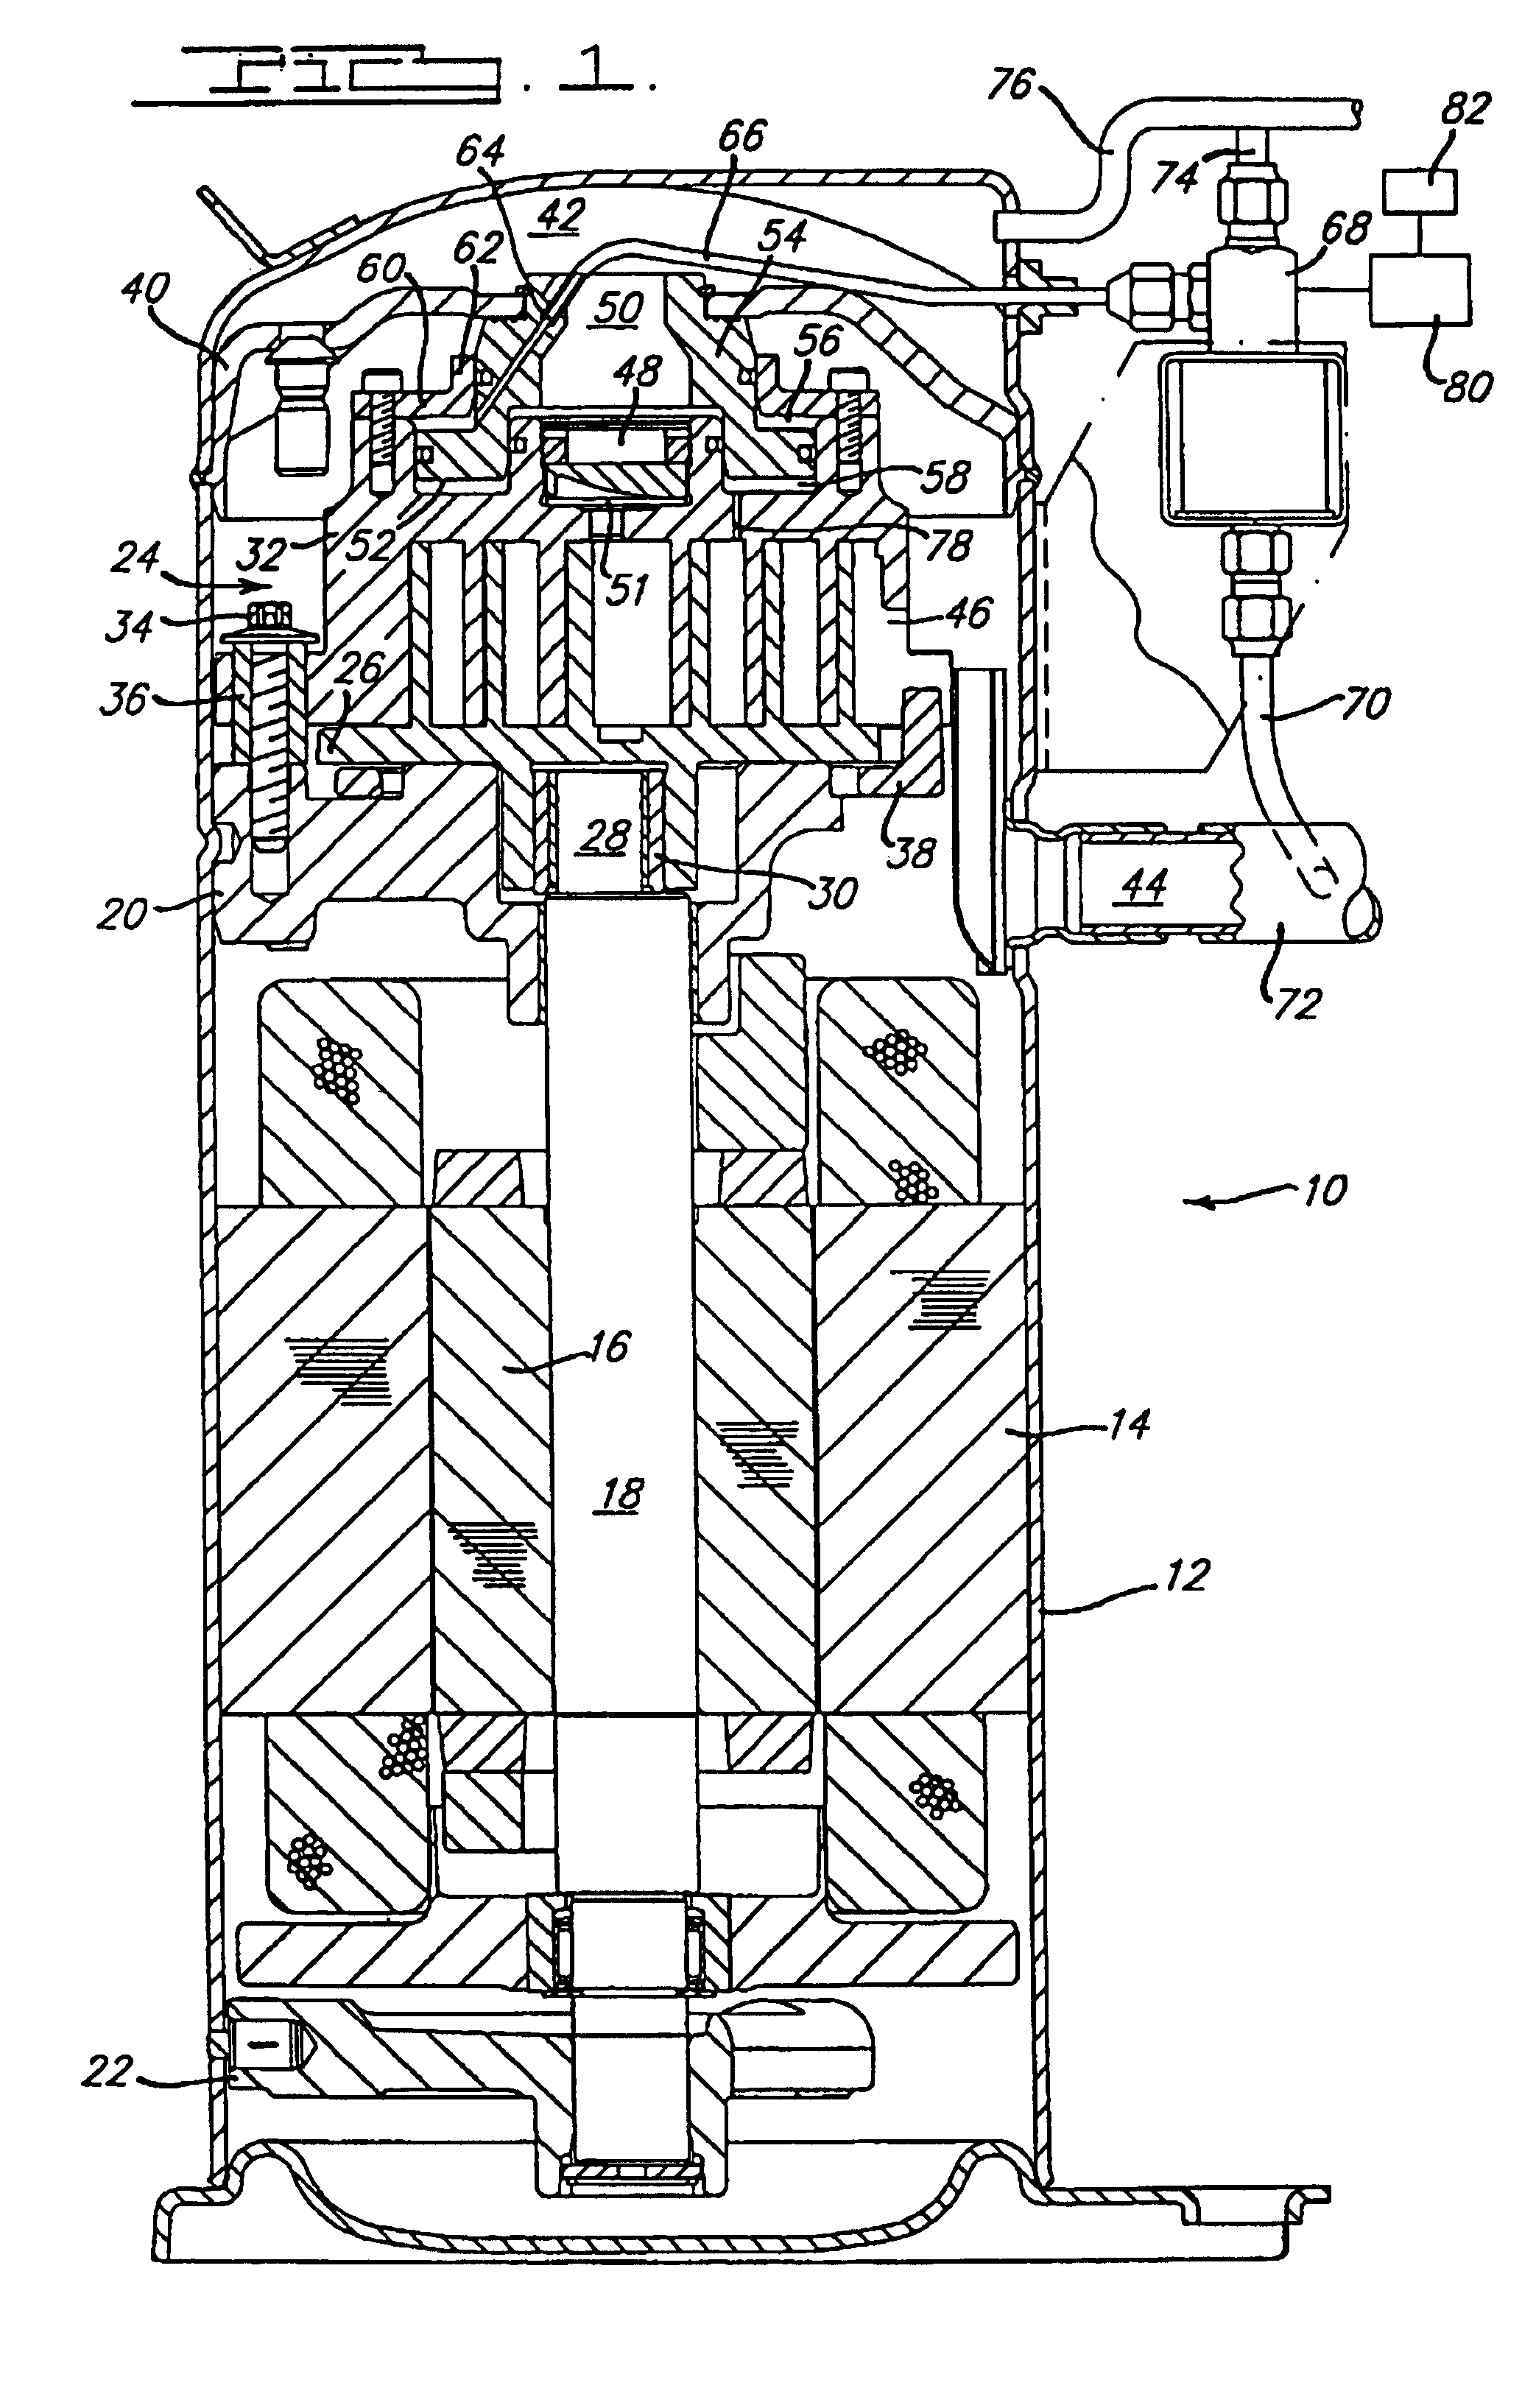 Capacity modulated scroll machine having one or more pin members movably disposed for restricting the radius of the orbiting scroll member